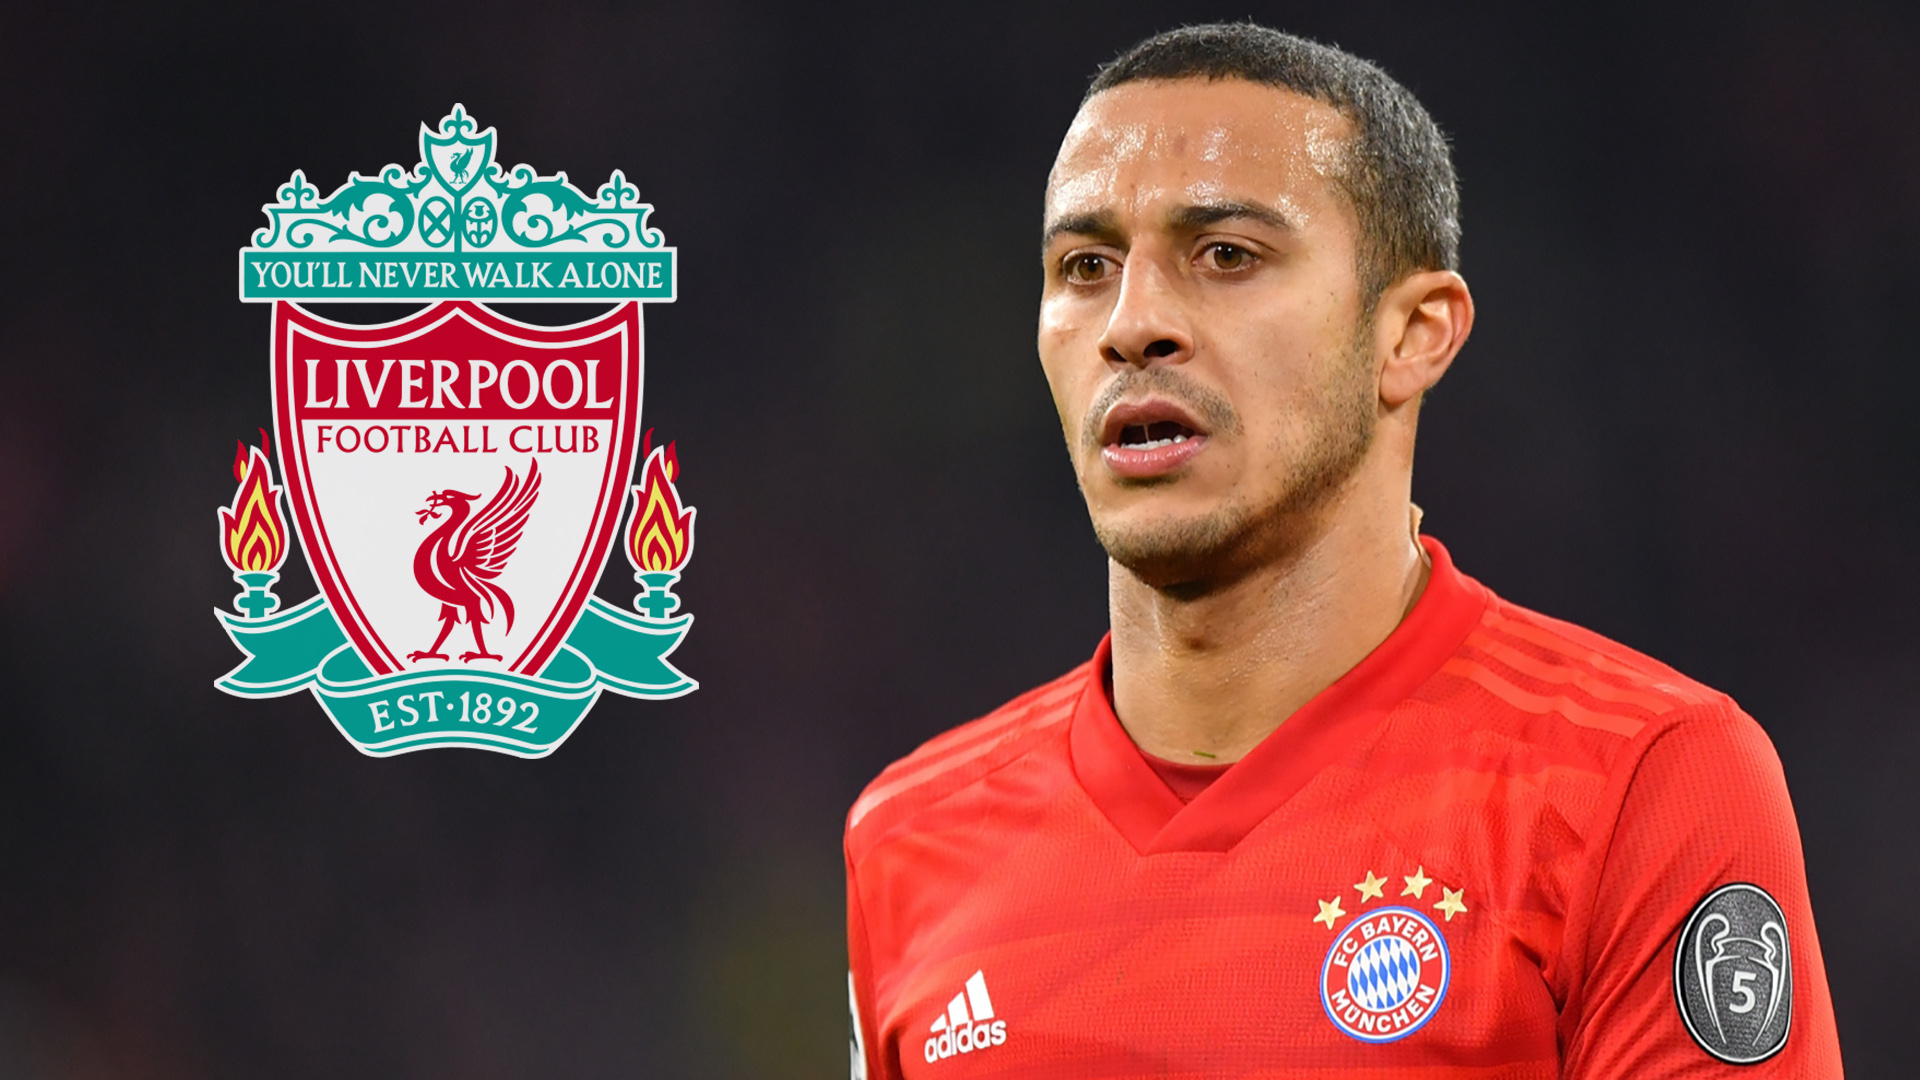 'Thiago would love Liverpool!' - Bayern star would 'fit perfectly with Klopp', says Matthaus